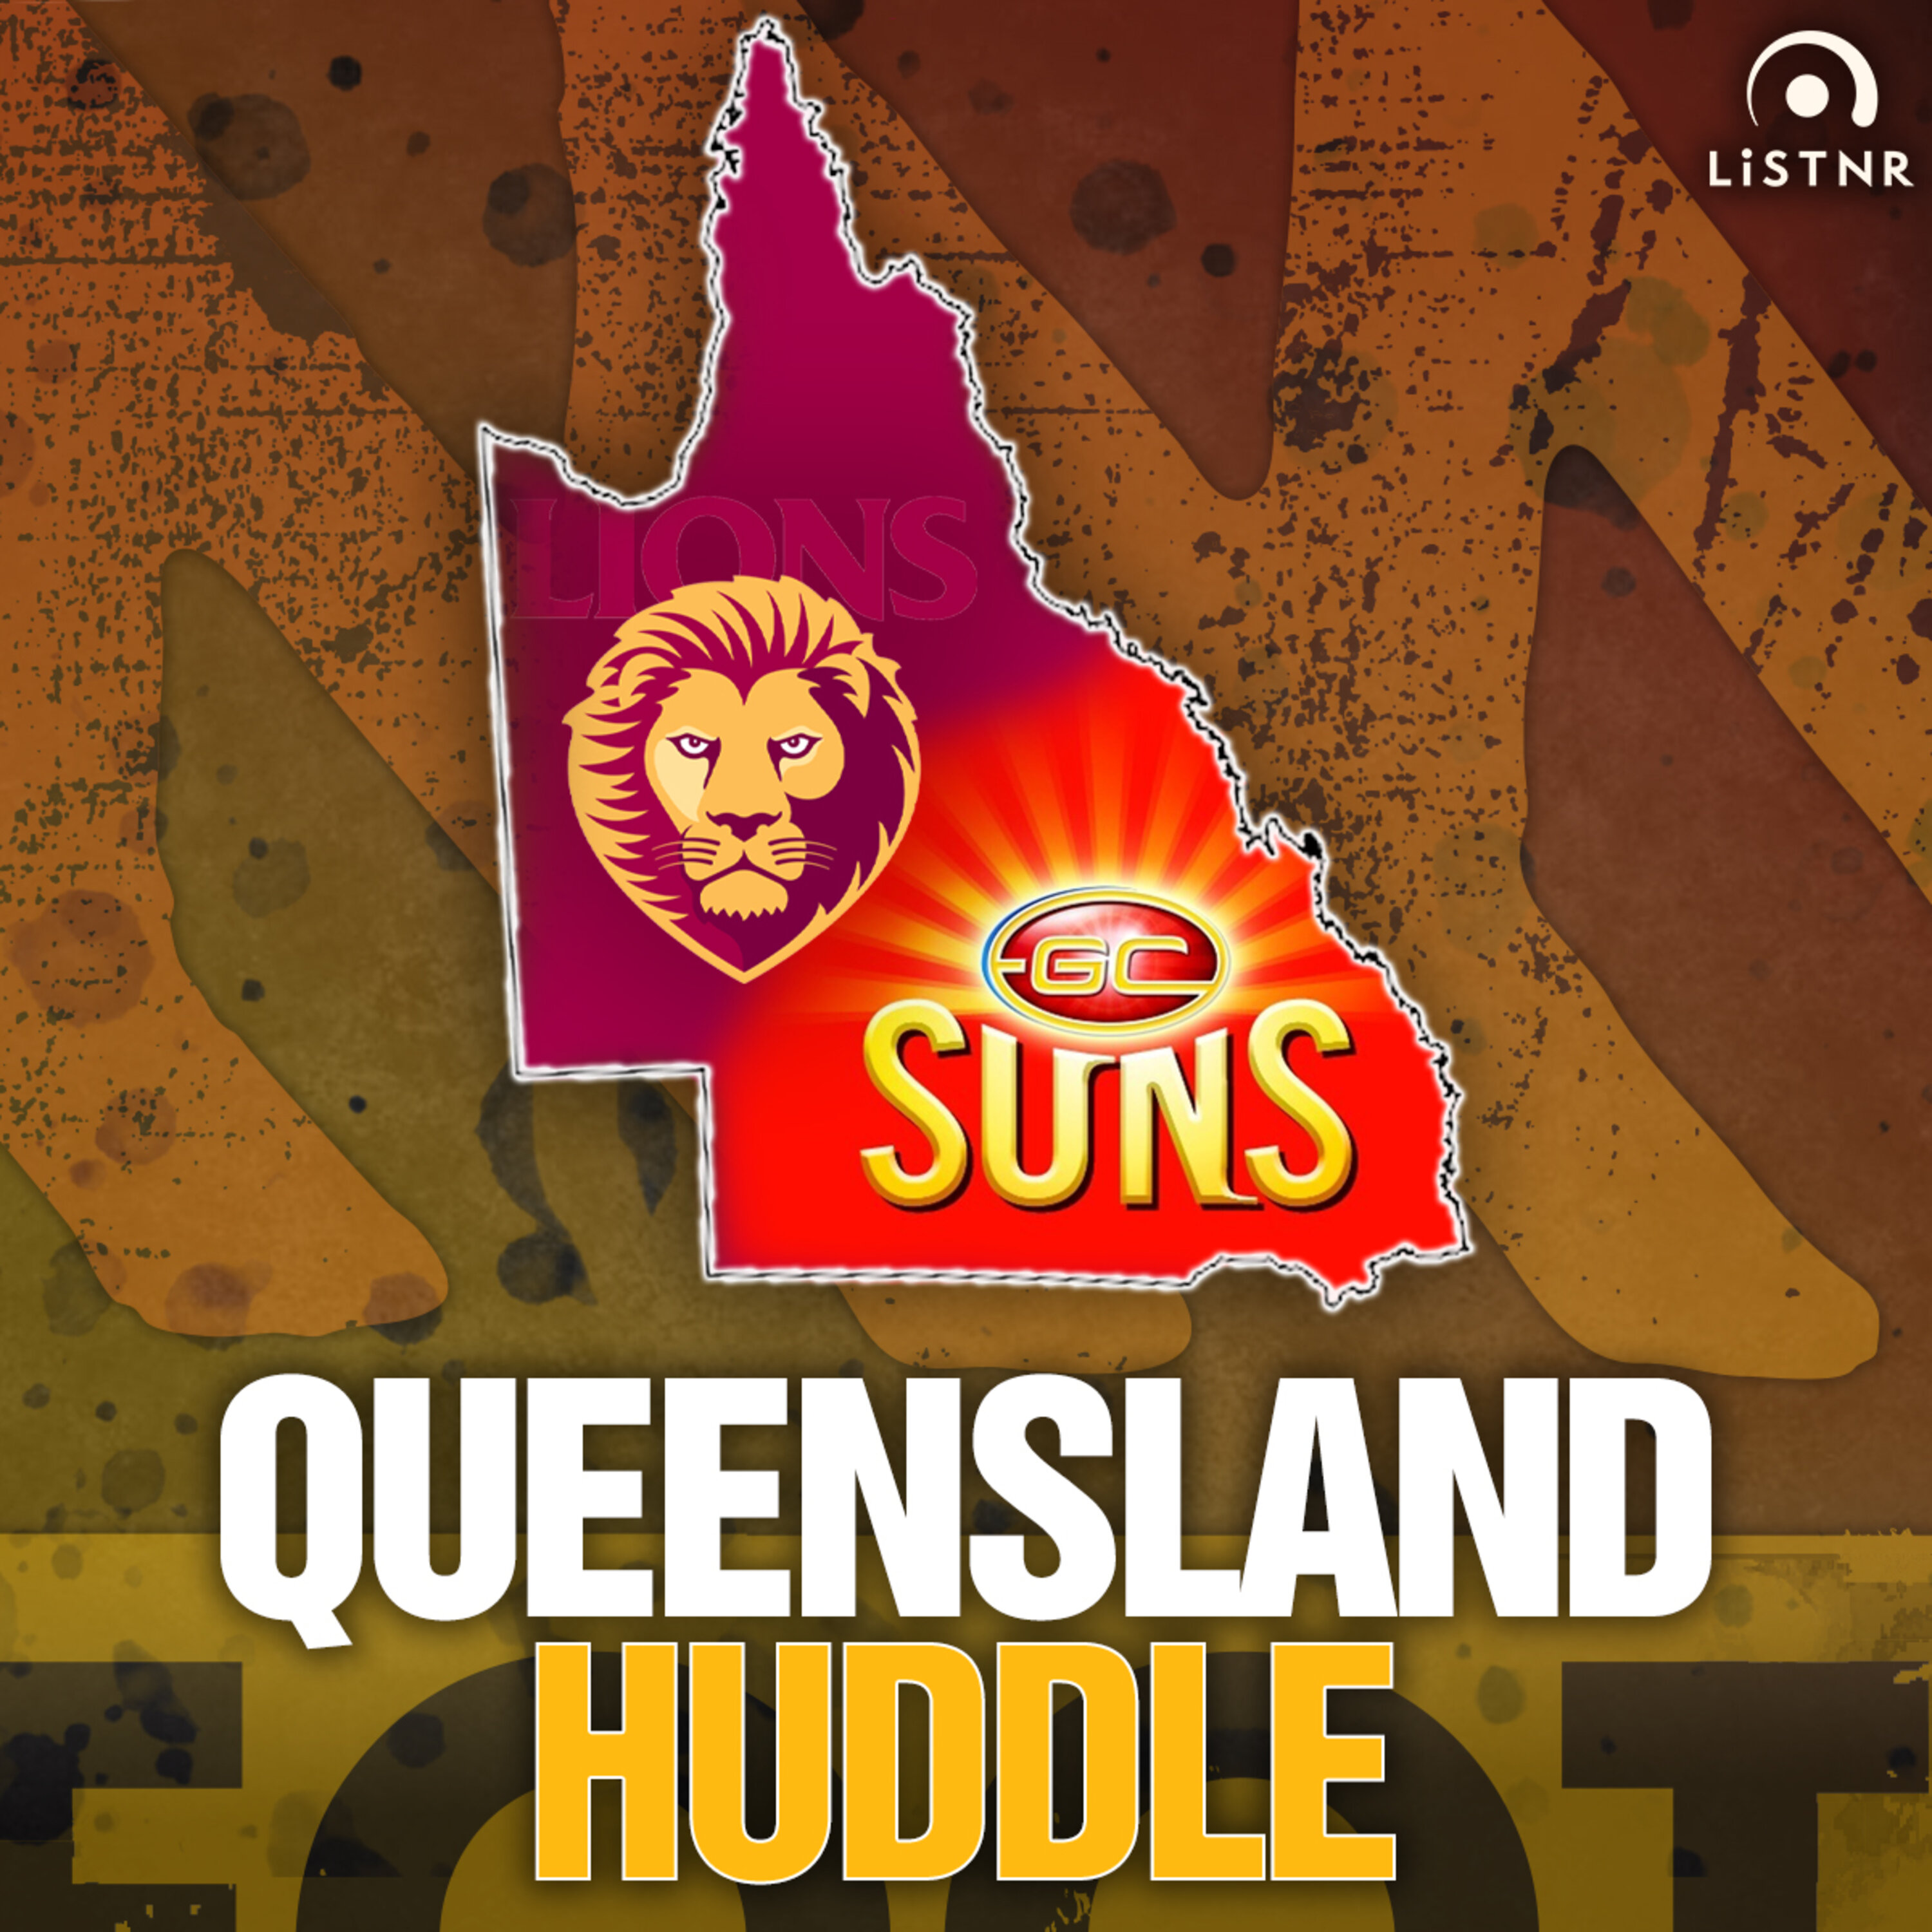 QUEENSLAND HUDDLE | Jarrod Berry ripens, Suns players in the shop window for trades, Queensland Huddle drove Mark Evans to Italy